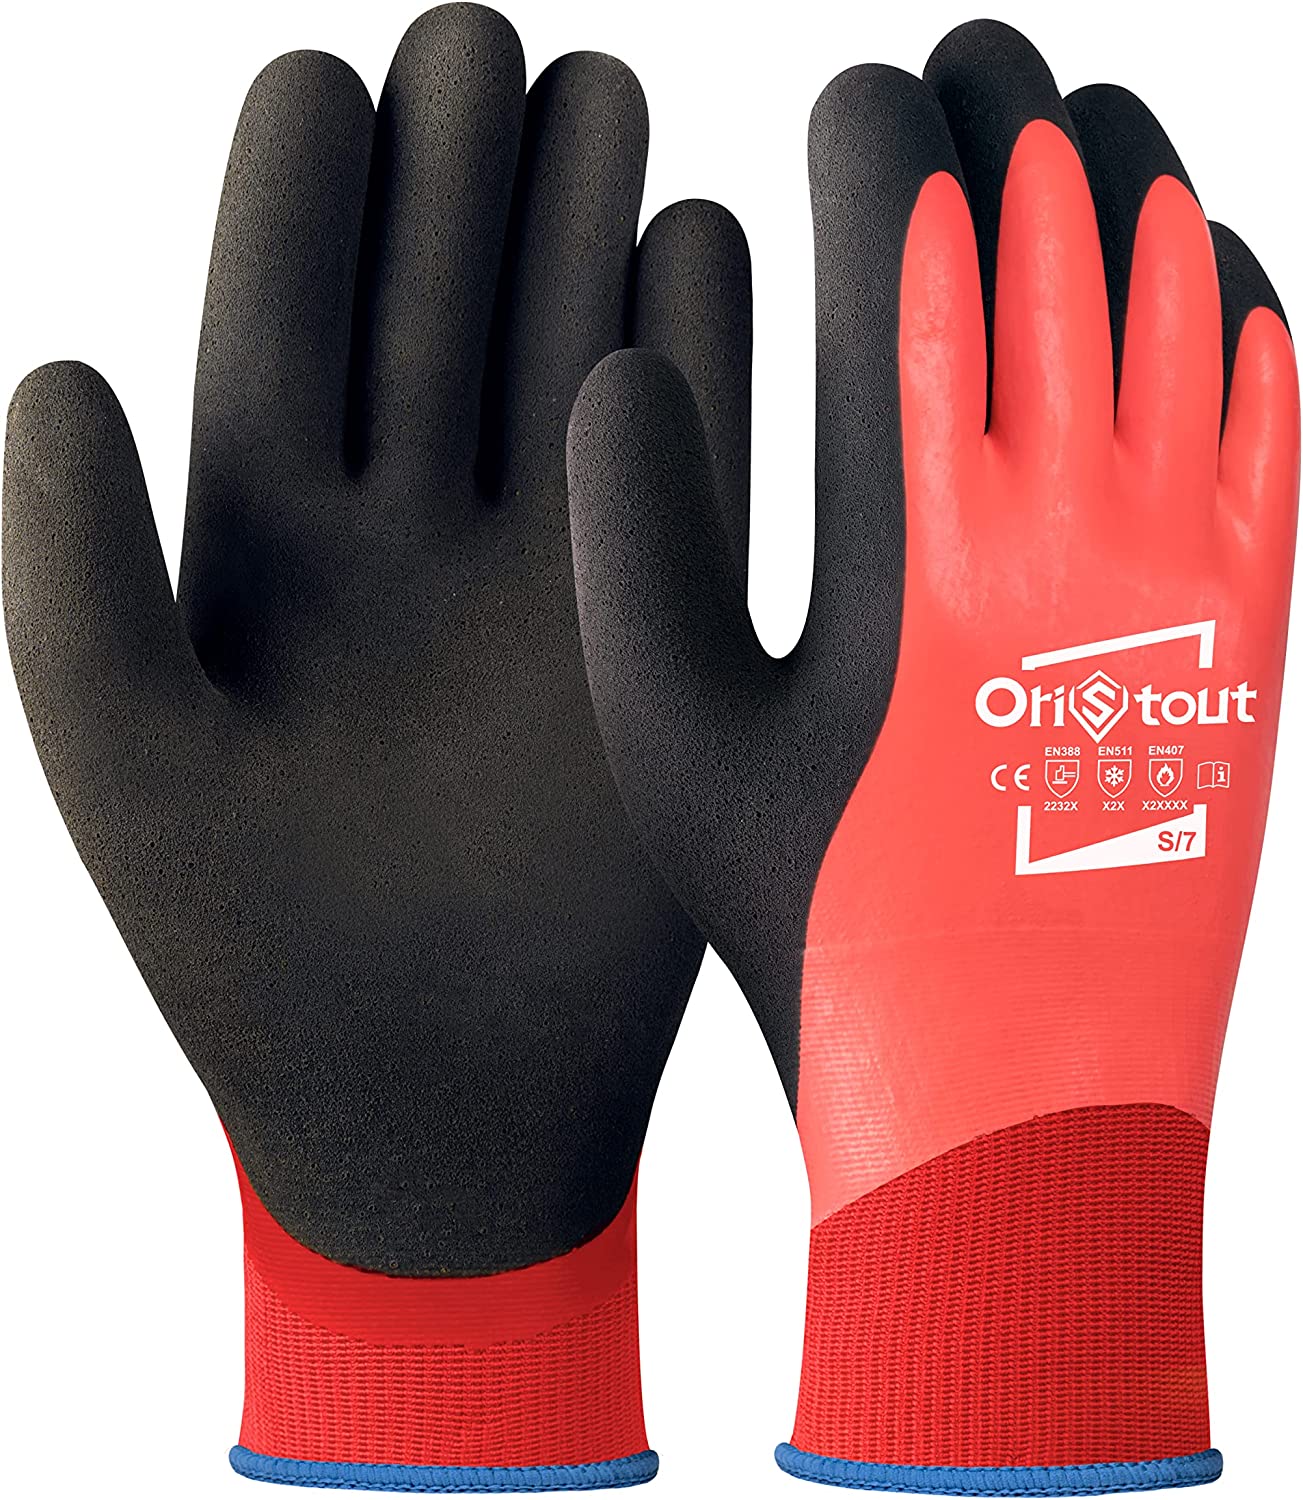 OriStout Waterproof Winter Work Gloves for Men and Women, Touchscreen, Freezer Gloves for Work Below Zero, Thermal Insulated Fishing Gloves, Super